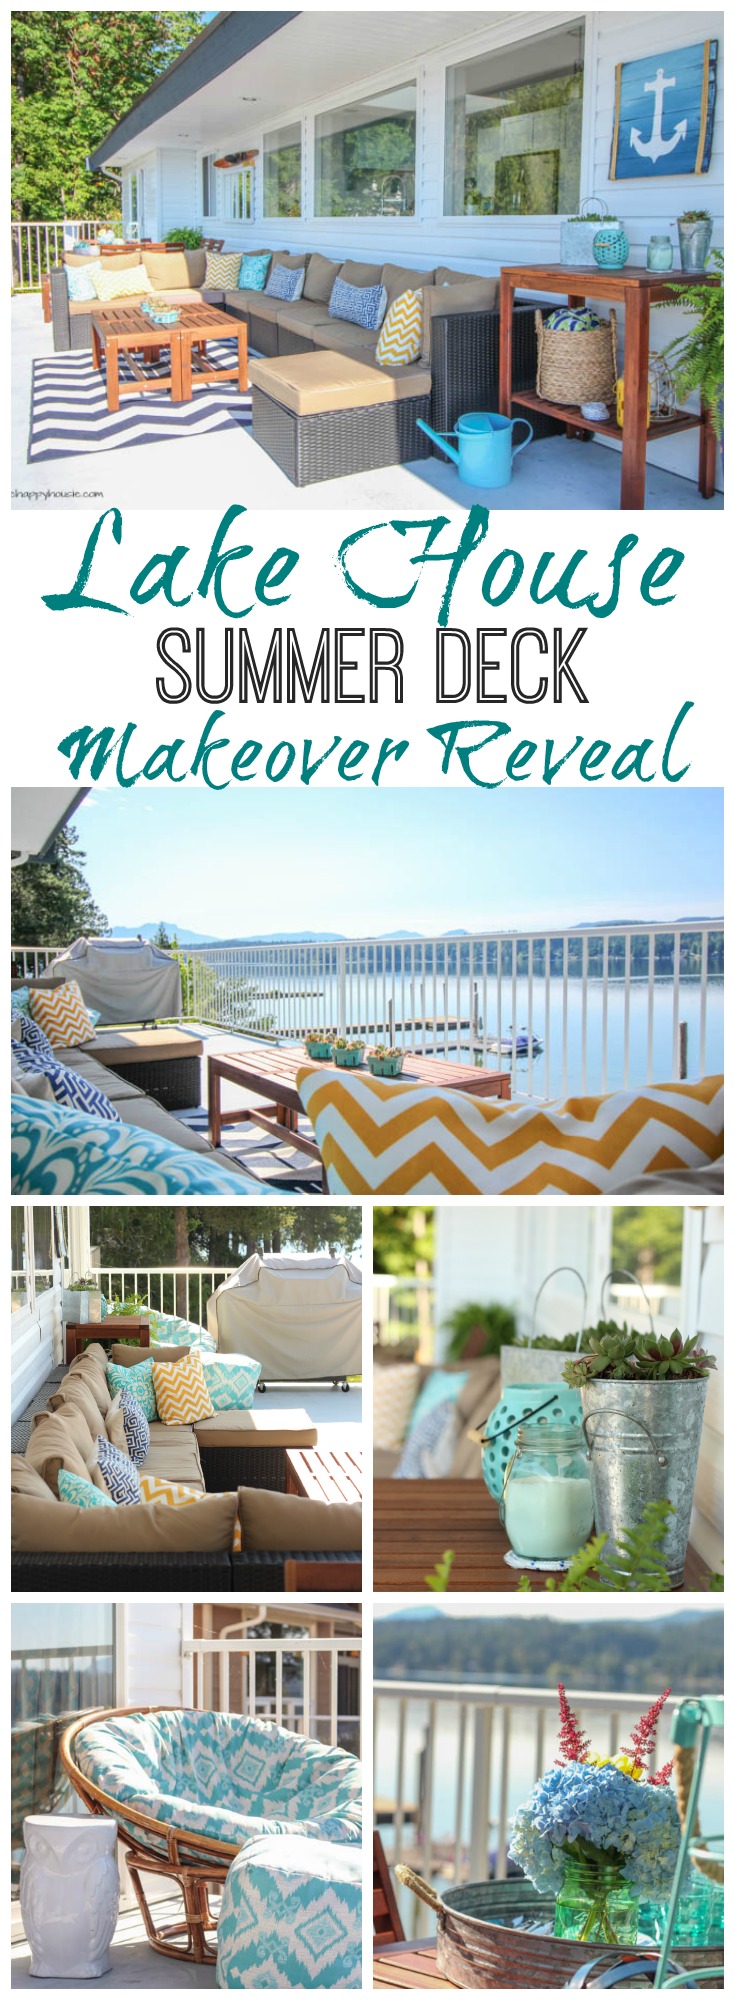 Tons of outdoor decorating ideas and inspiration on this beautiful lake house summer deck makeover reveal and tour